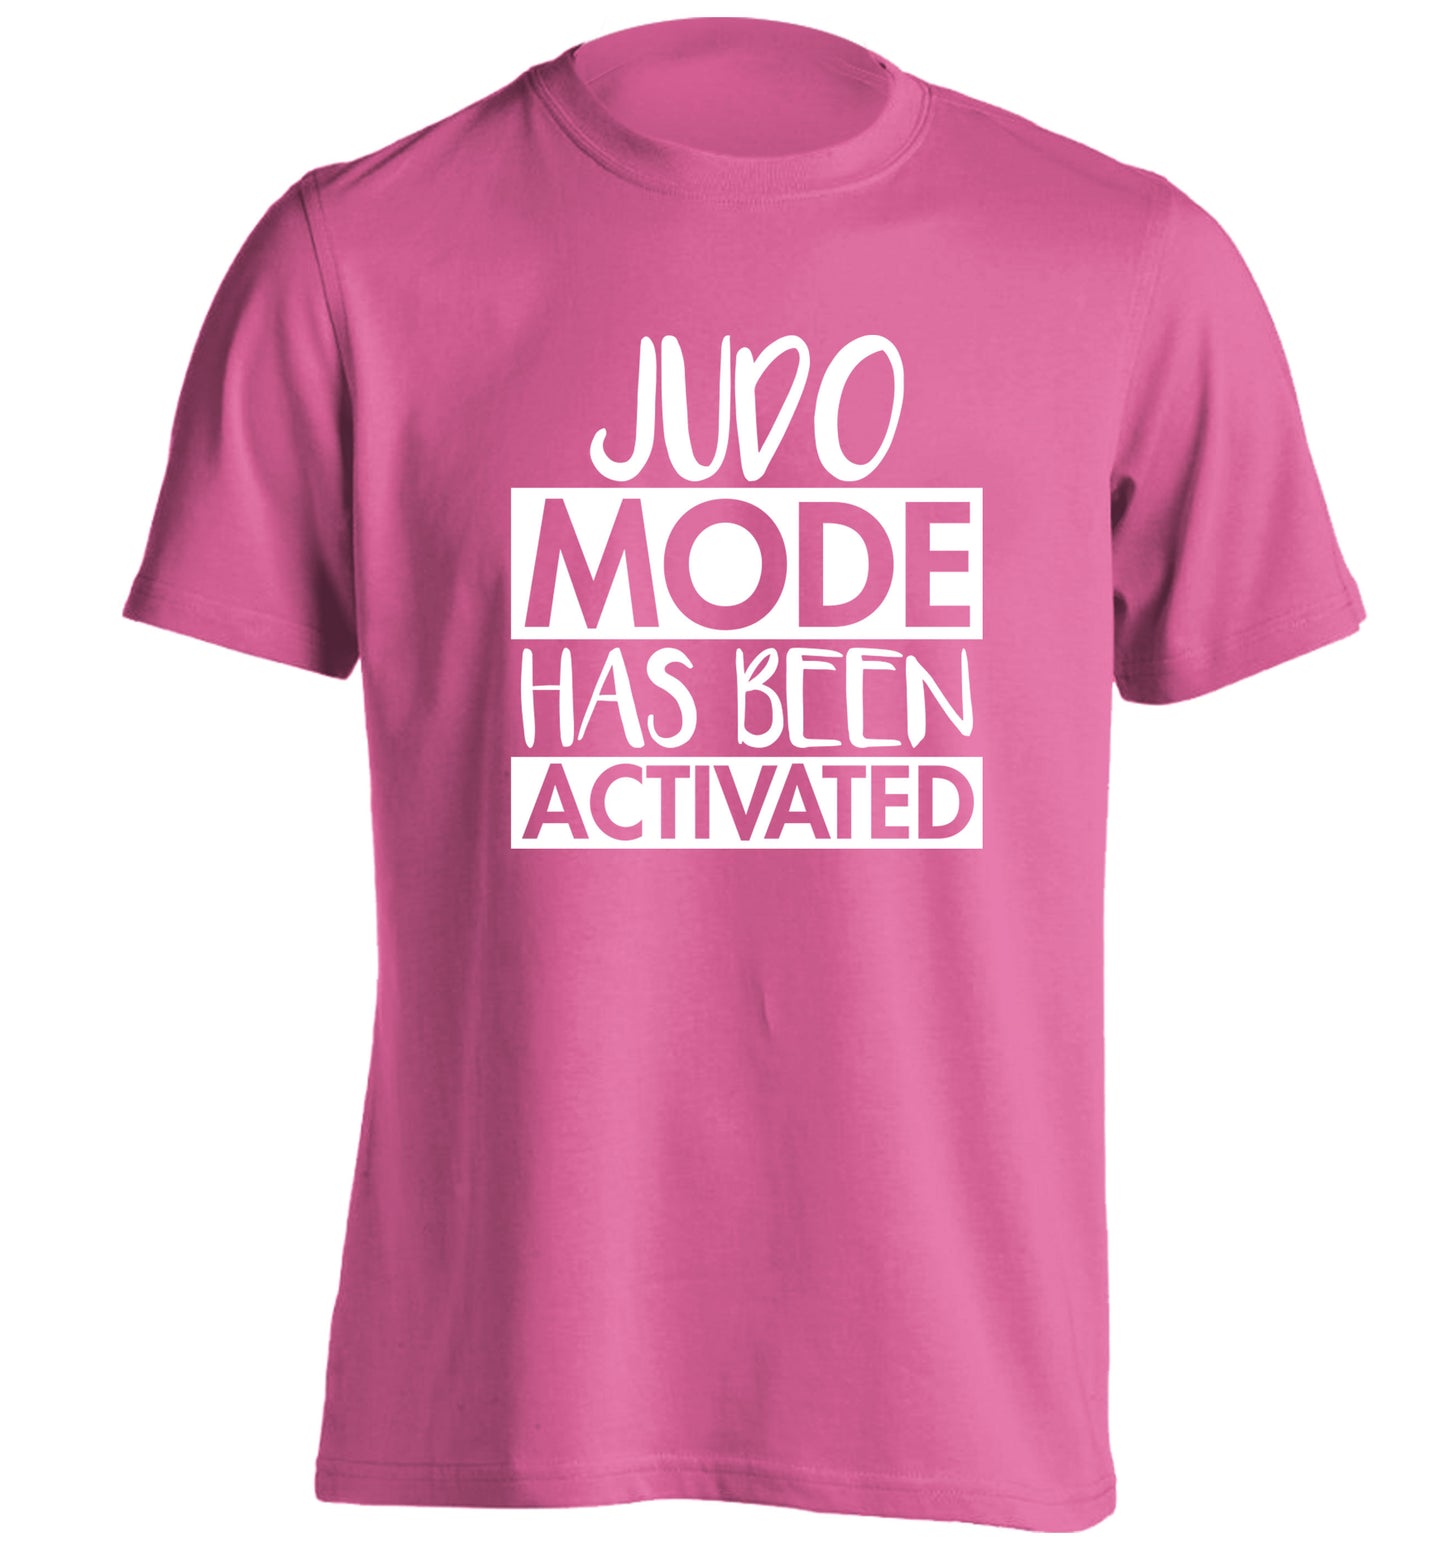 Judo mode activated adults unisex pink Tshirt 2XL